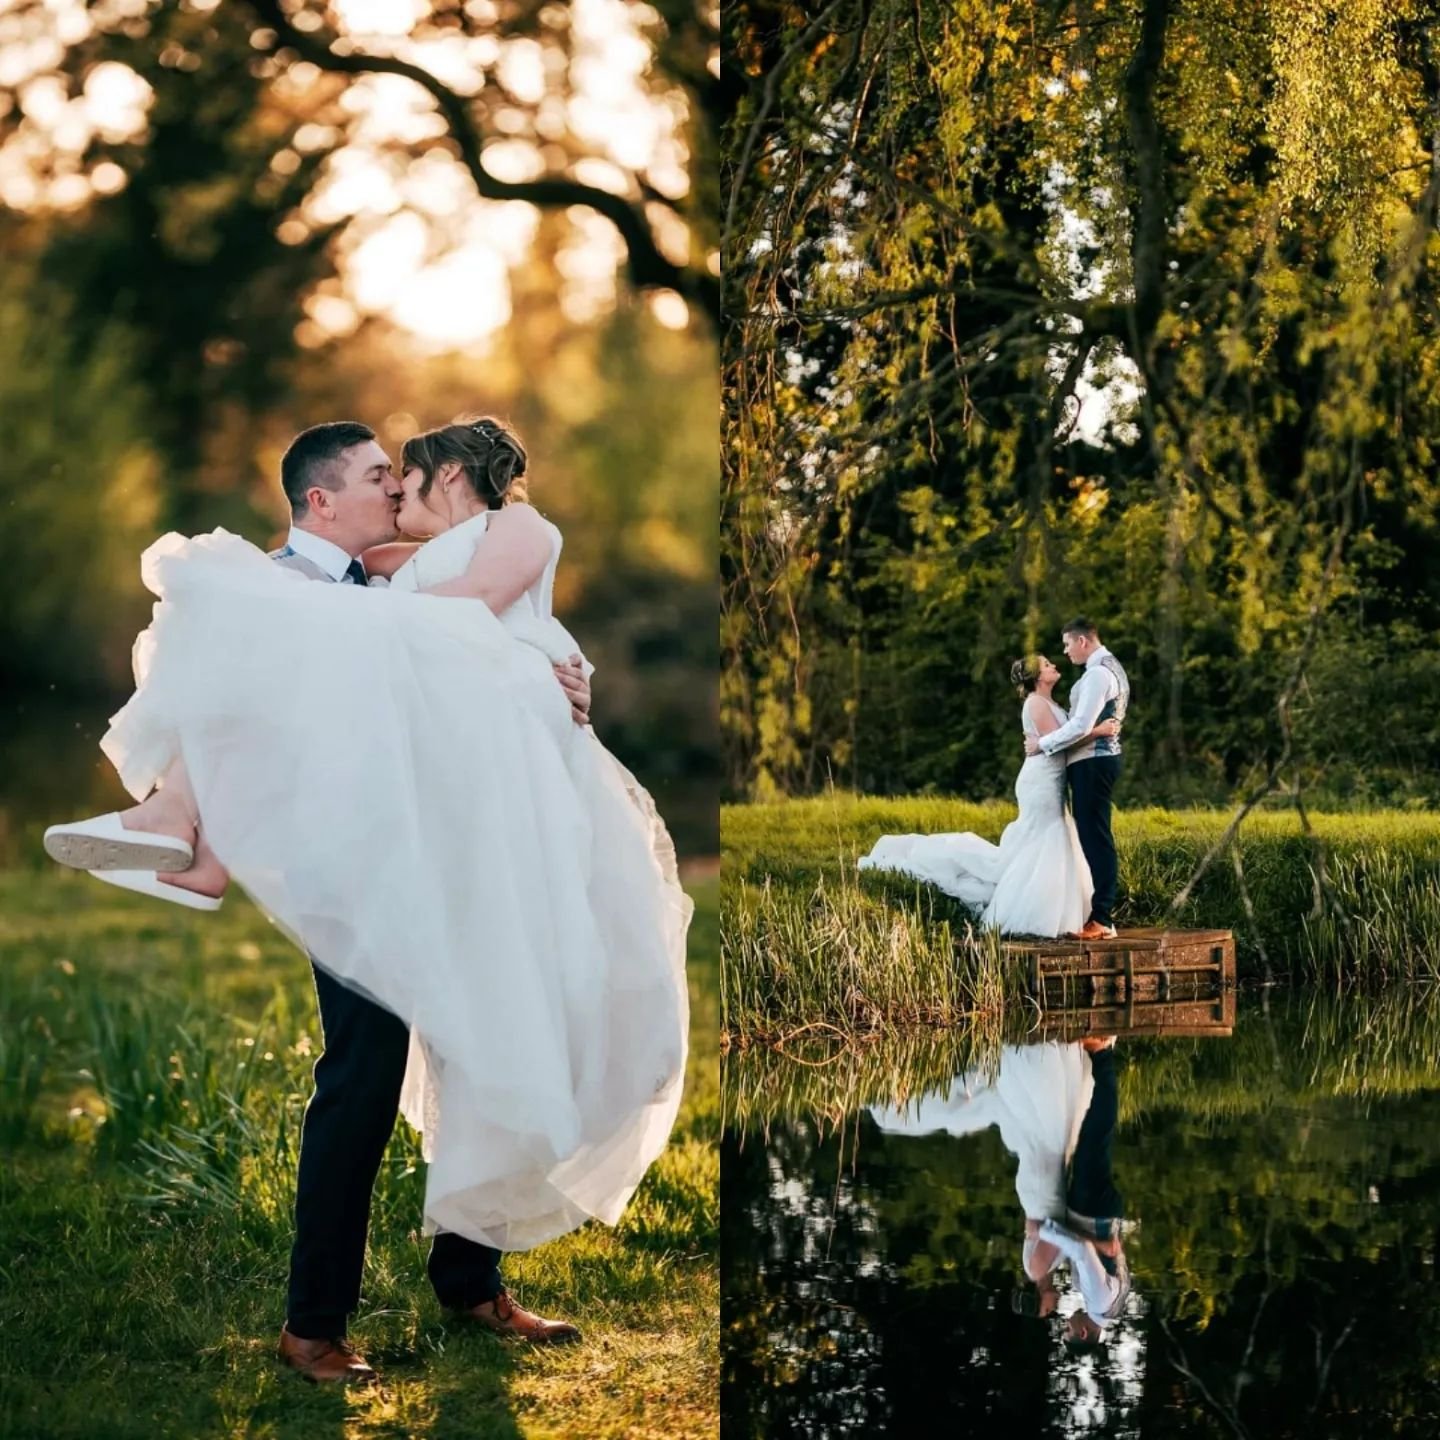 What a mega day today at Inglewood Manor with Rebecca &amp; Dean! The wedding of their dreams, outdoors in the sunshine and lovely grounds! Absolutely loved being a part of today! Here's just a few photos from today!
Lovely to work with @thetalltoast